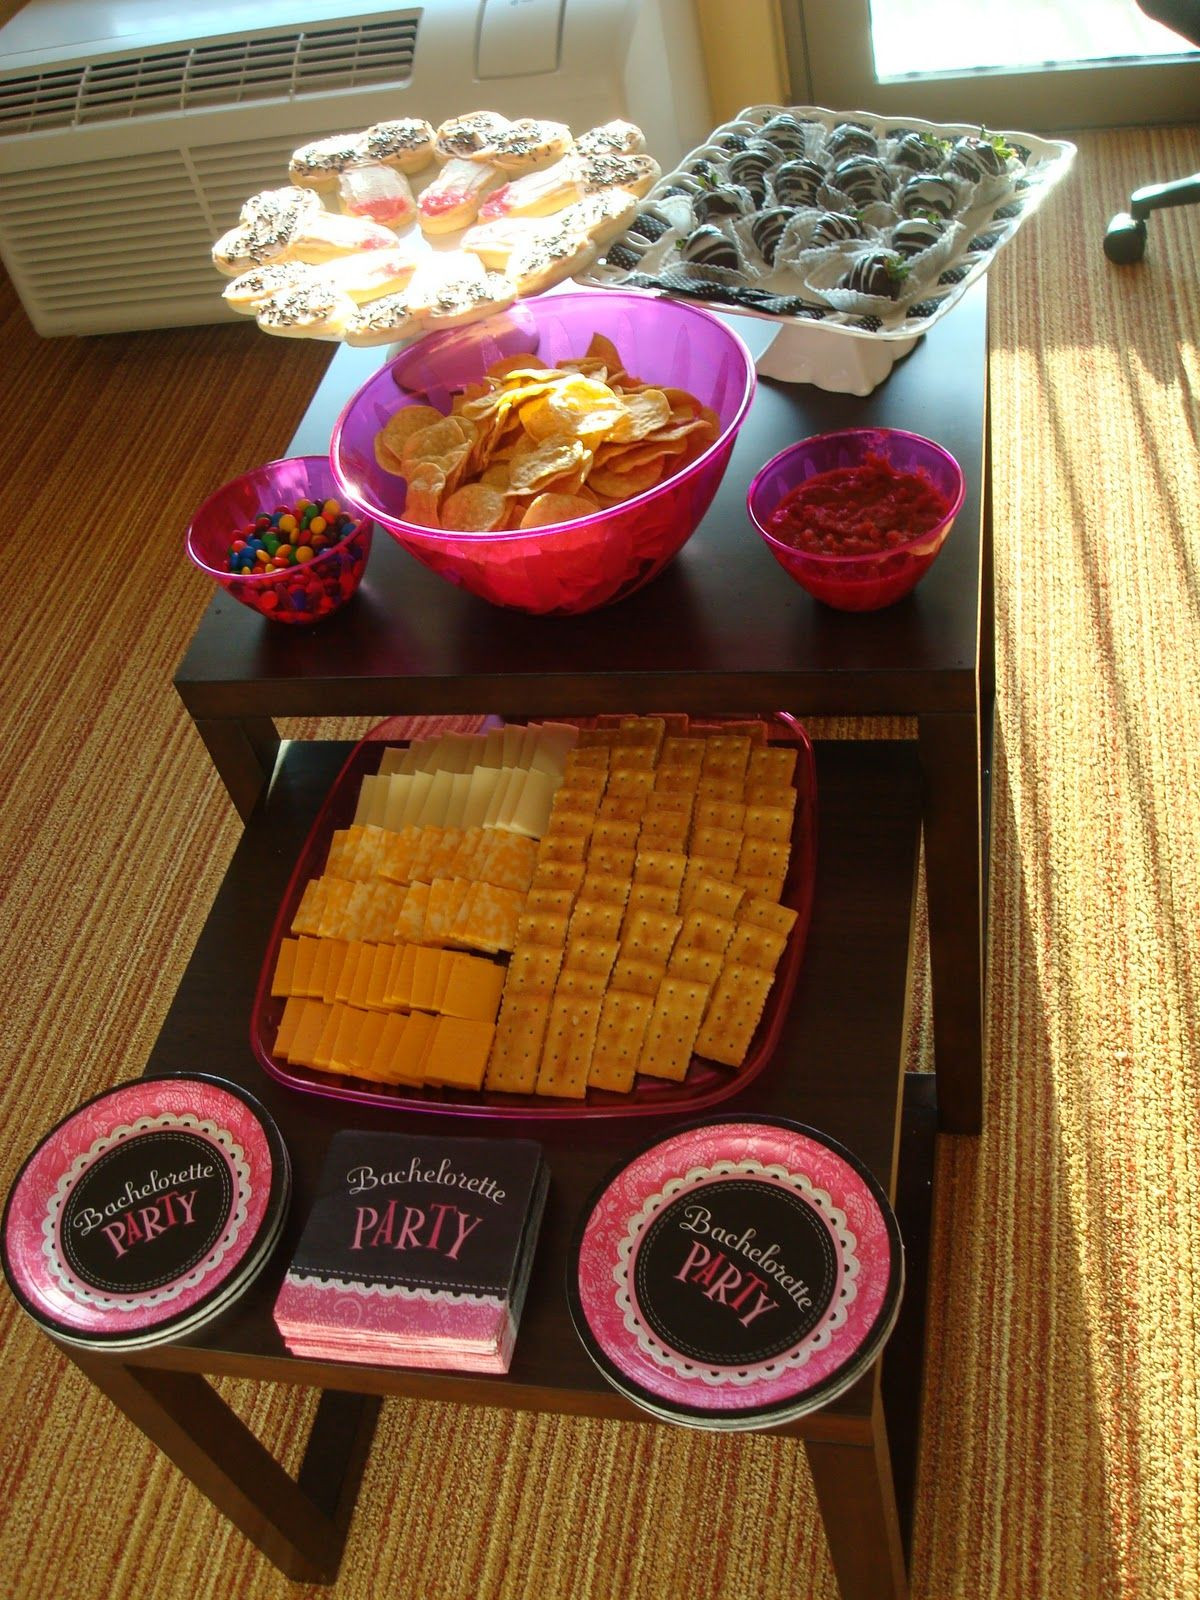 Bachelorette Party Dinner Ideas
 Bachelorette Party Weekend Hot Pink Black and Silver